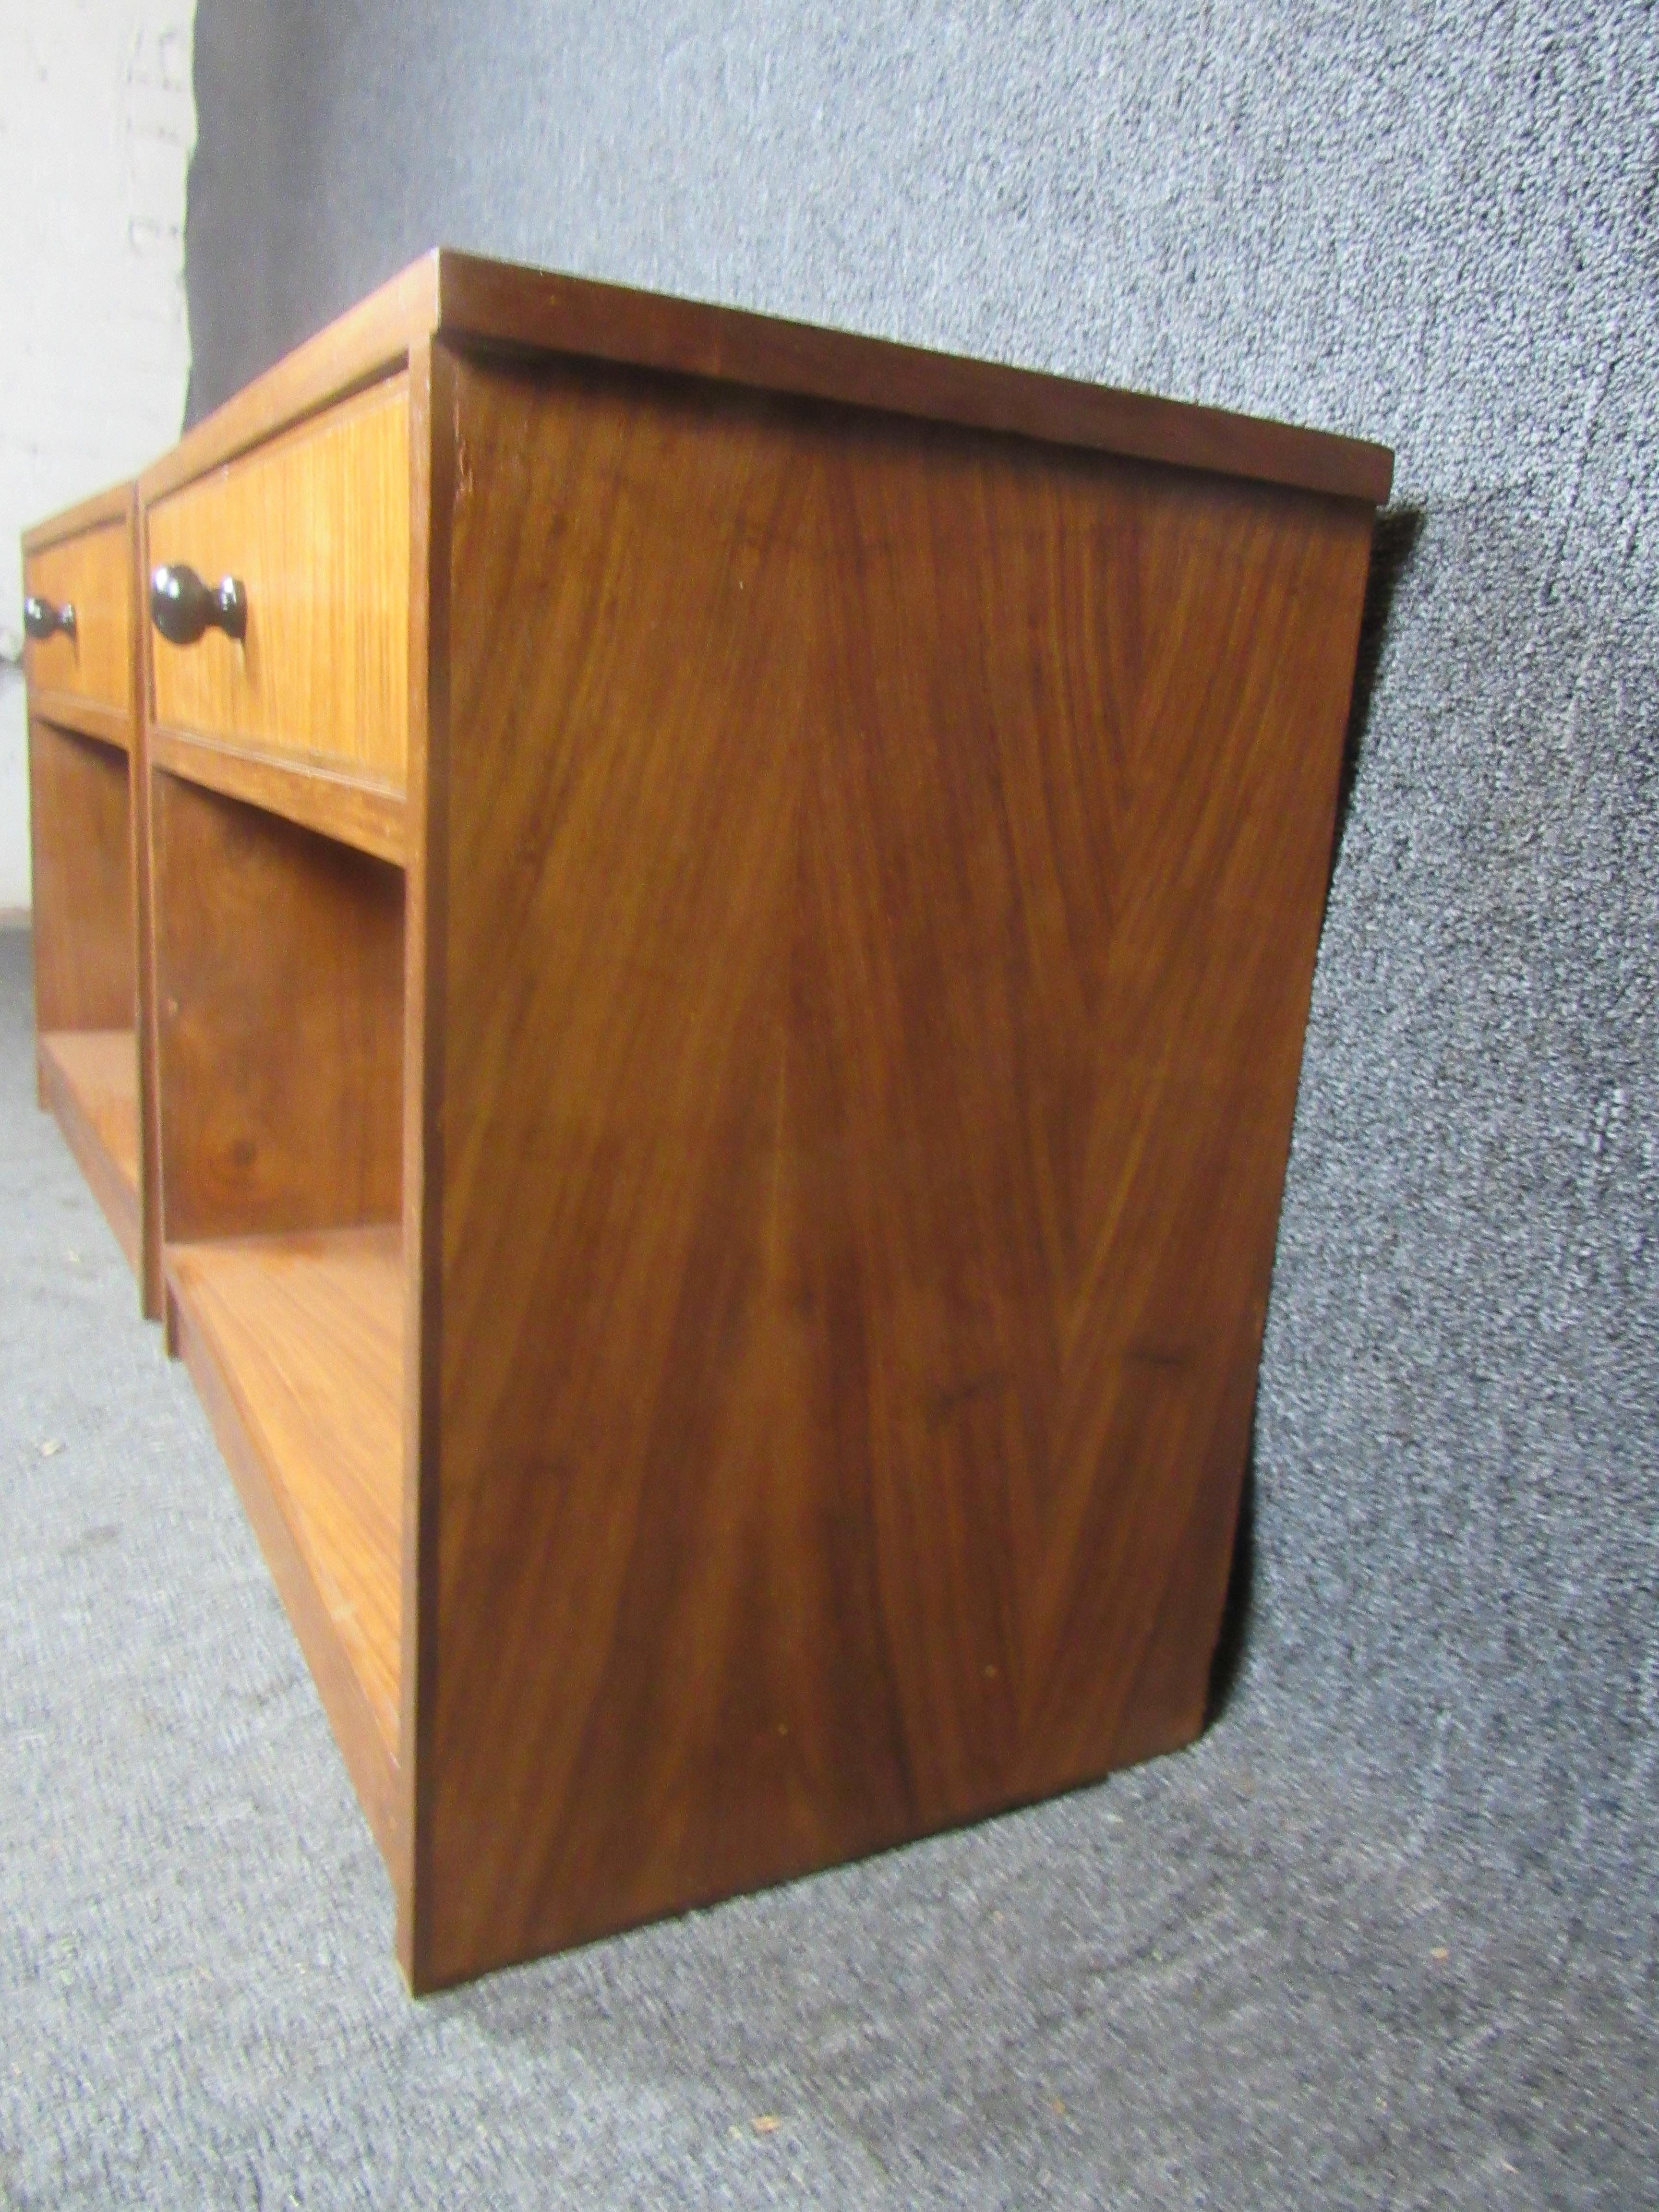 Midcentury Teak End Tables In Good Condition For Sale In Brooklyn, NY